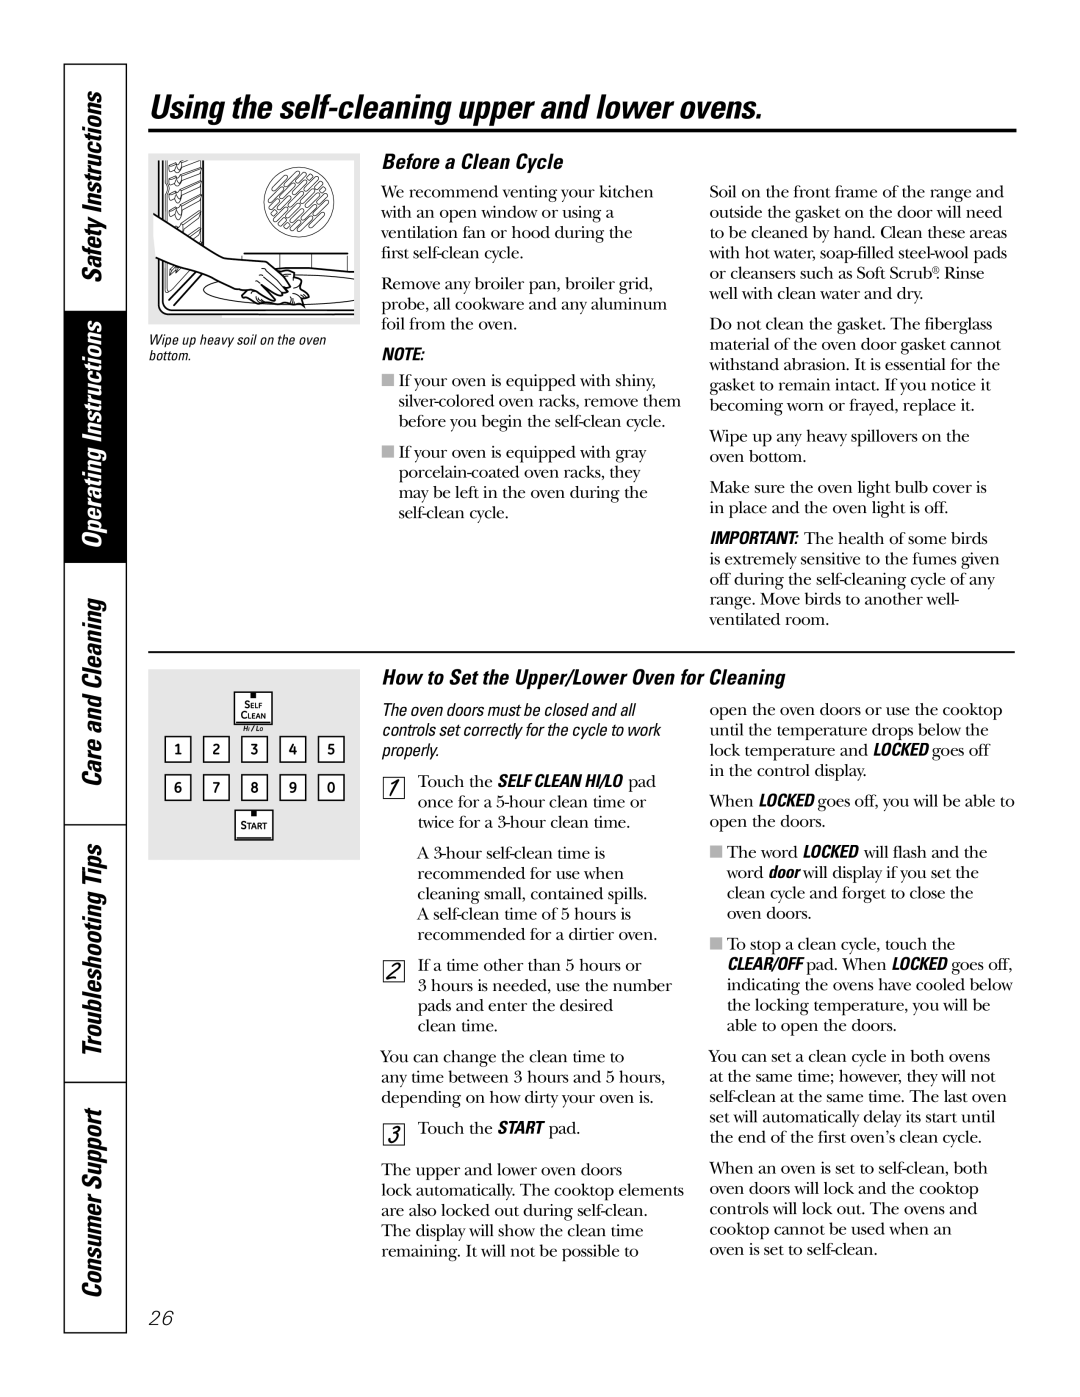 GE PB976 Cleaning Operating Instructions Safety, Consumer Support Troubleshooting Tips Care and, Before a Clean Cycle 